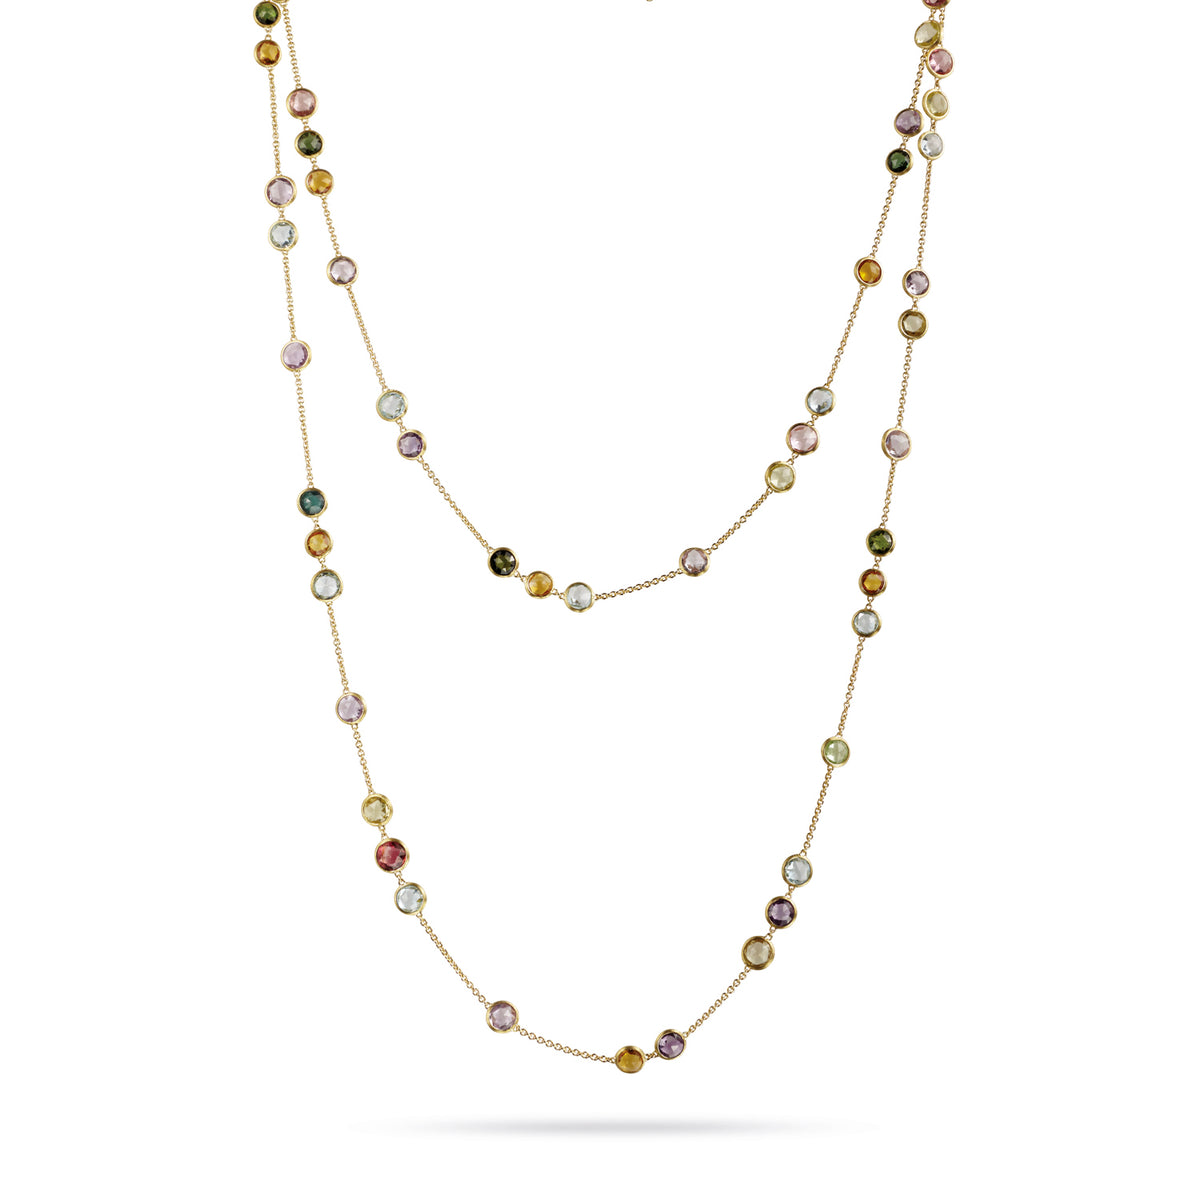 Jaipur Colour Necklace in 18k Yellow Gold with Mixed Gemstones Long - Orsini Jewellers NZ